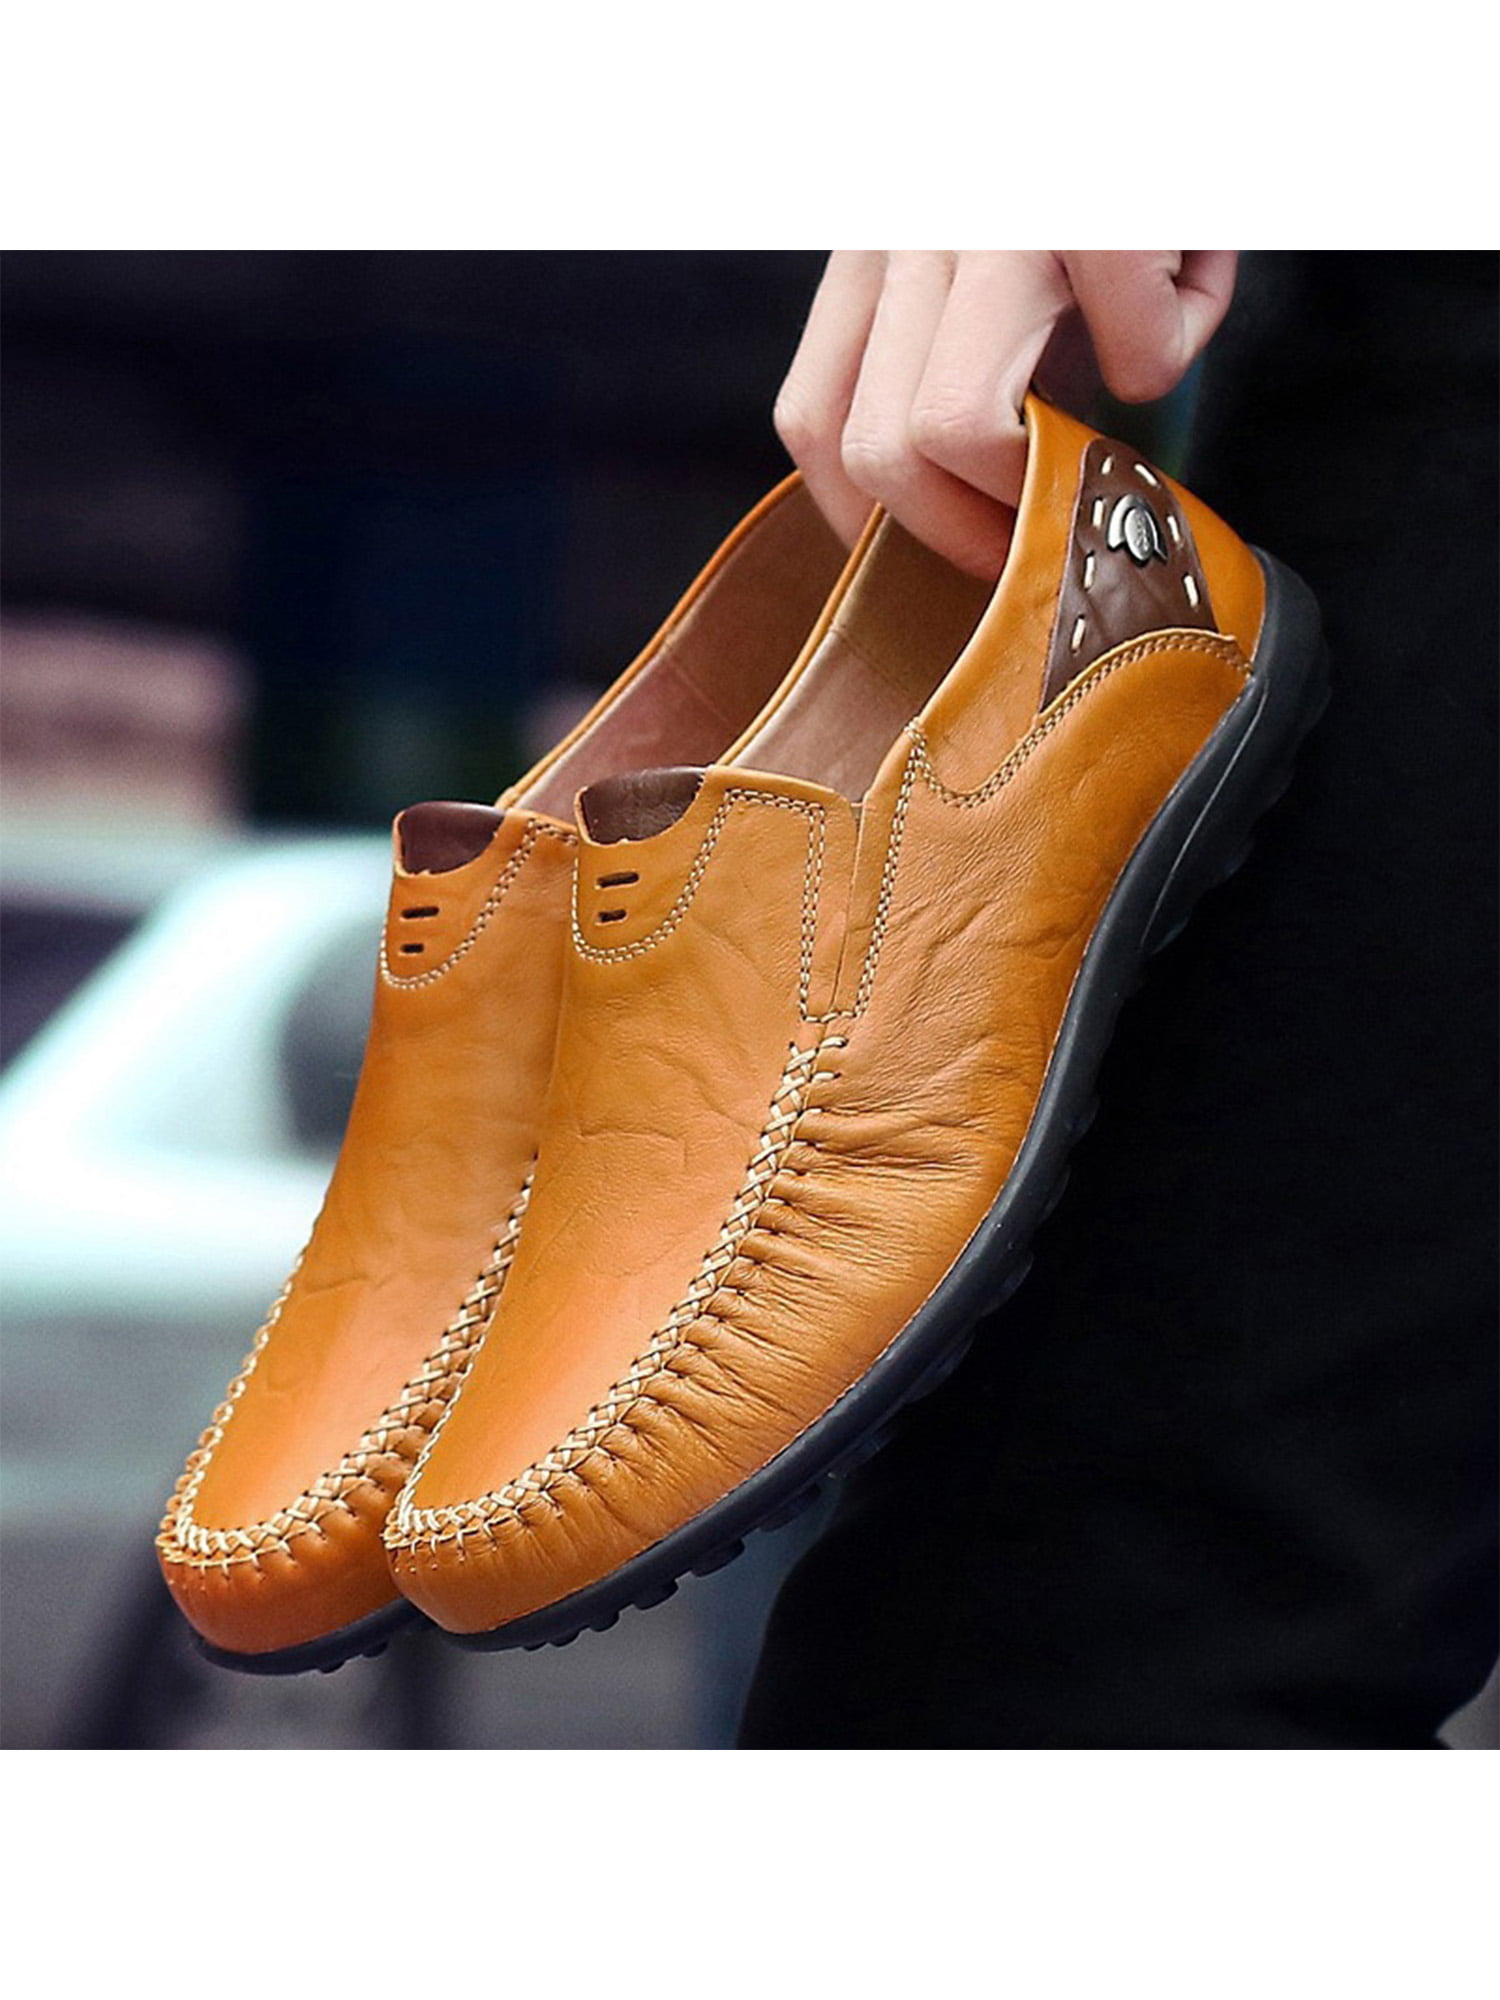 2019 New Loafers Shoes Handsome Comfortable Brand Men Shoes,Orange,12.5